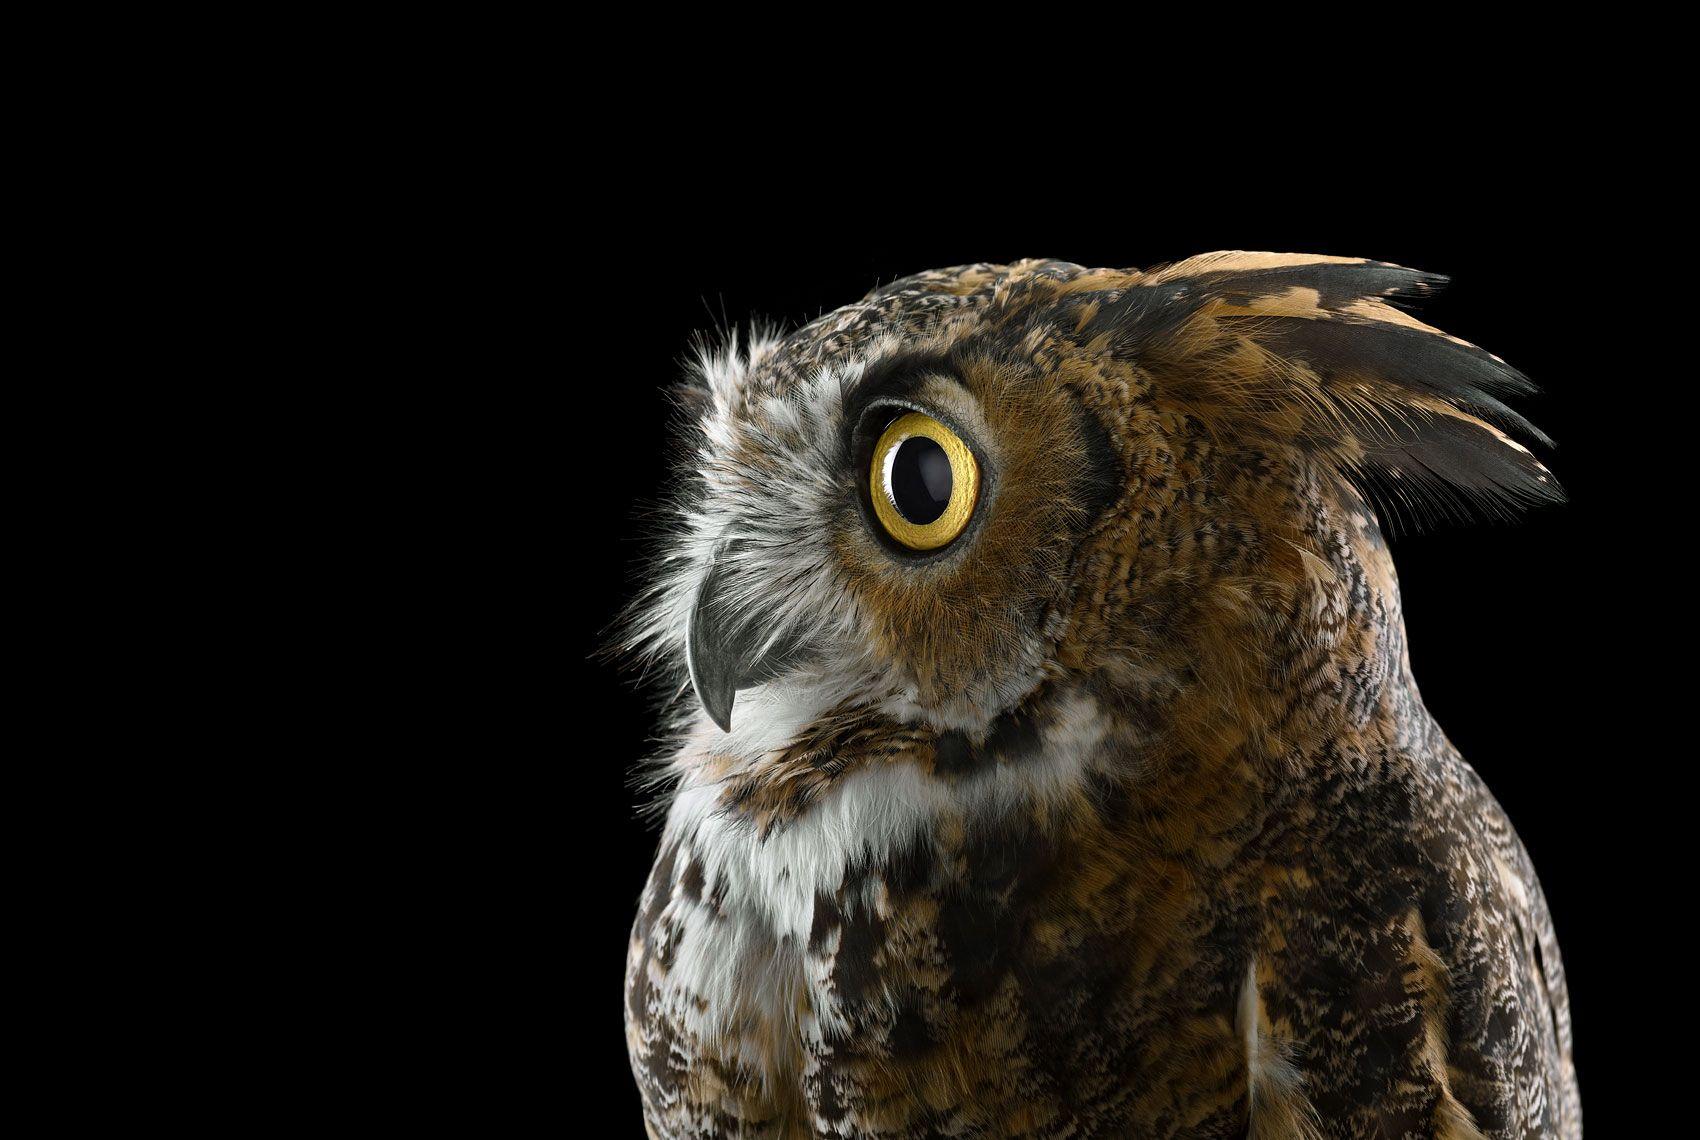 'Great Horned Owl #1, Espanola, NM, 2011' is a limited-edition photograph by contemporary artist Brad Wilson from the ‘Affinity’ series which features studio portraits of wild animals. 

This photograph is sold unframed as a print only. It is